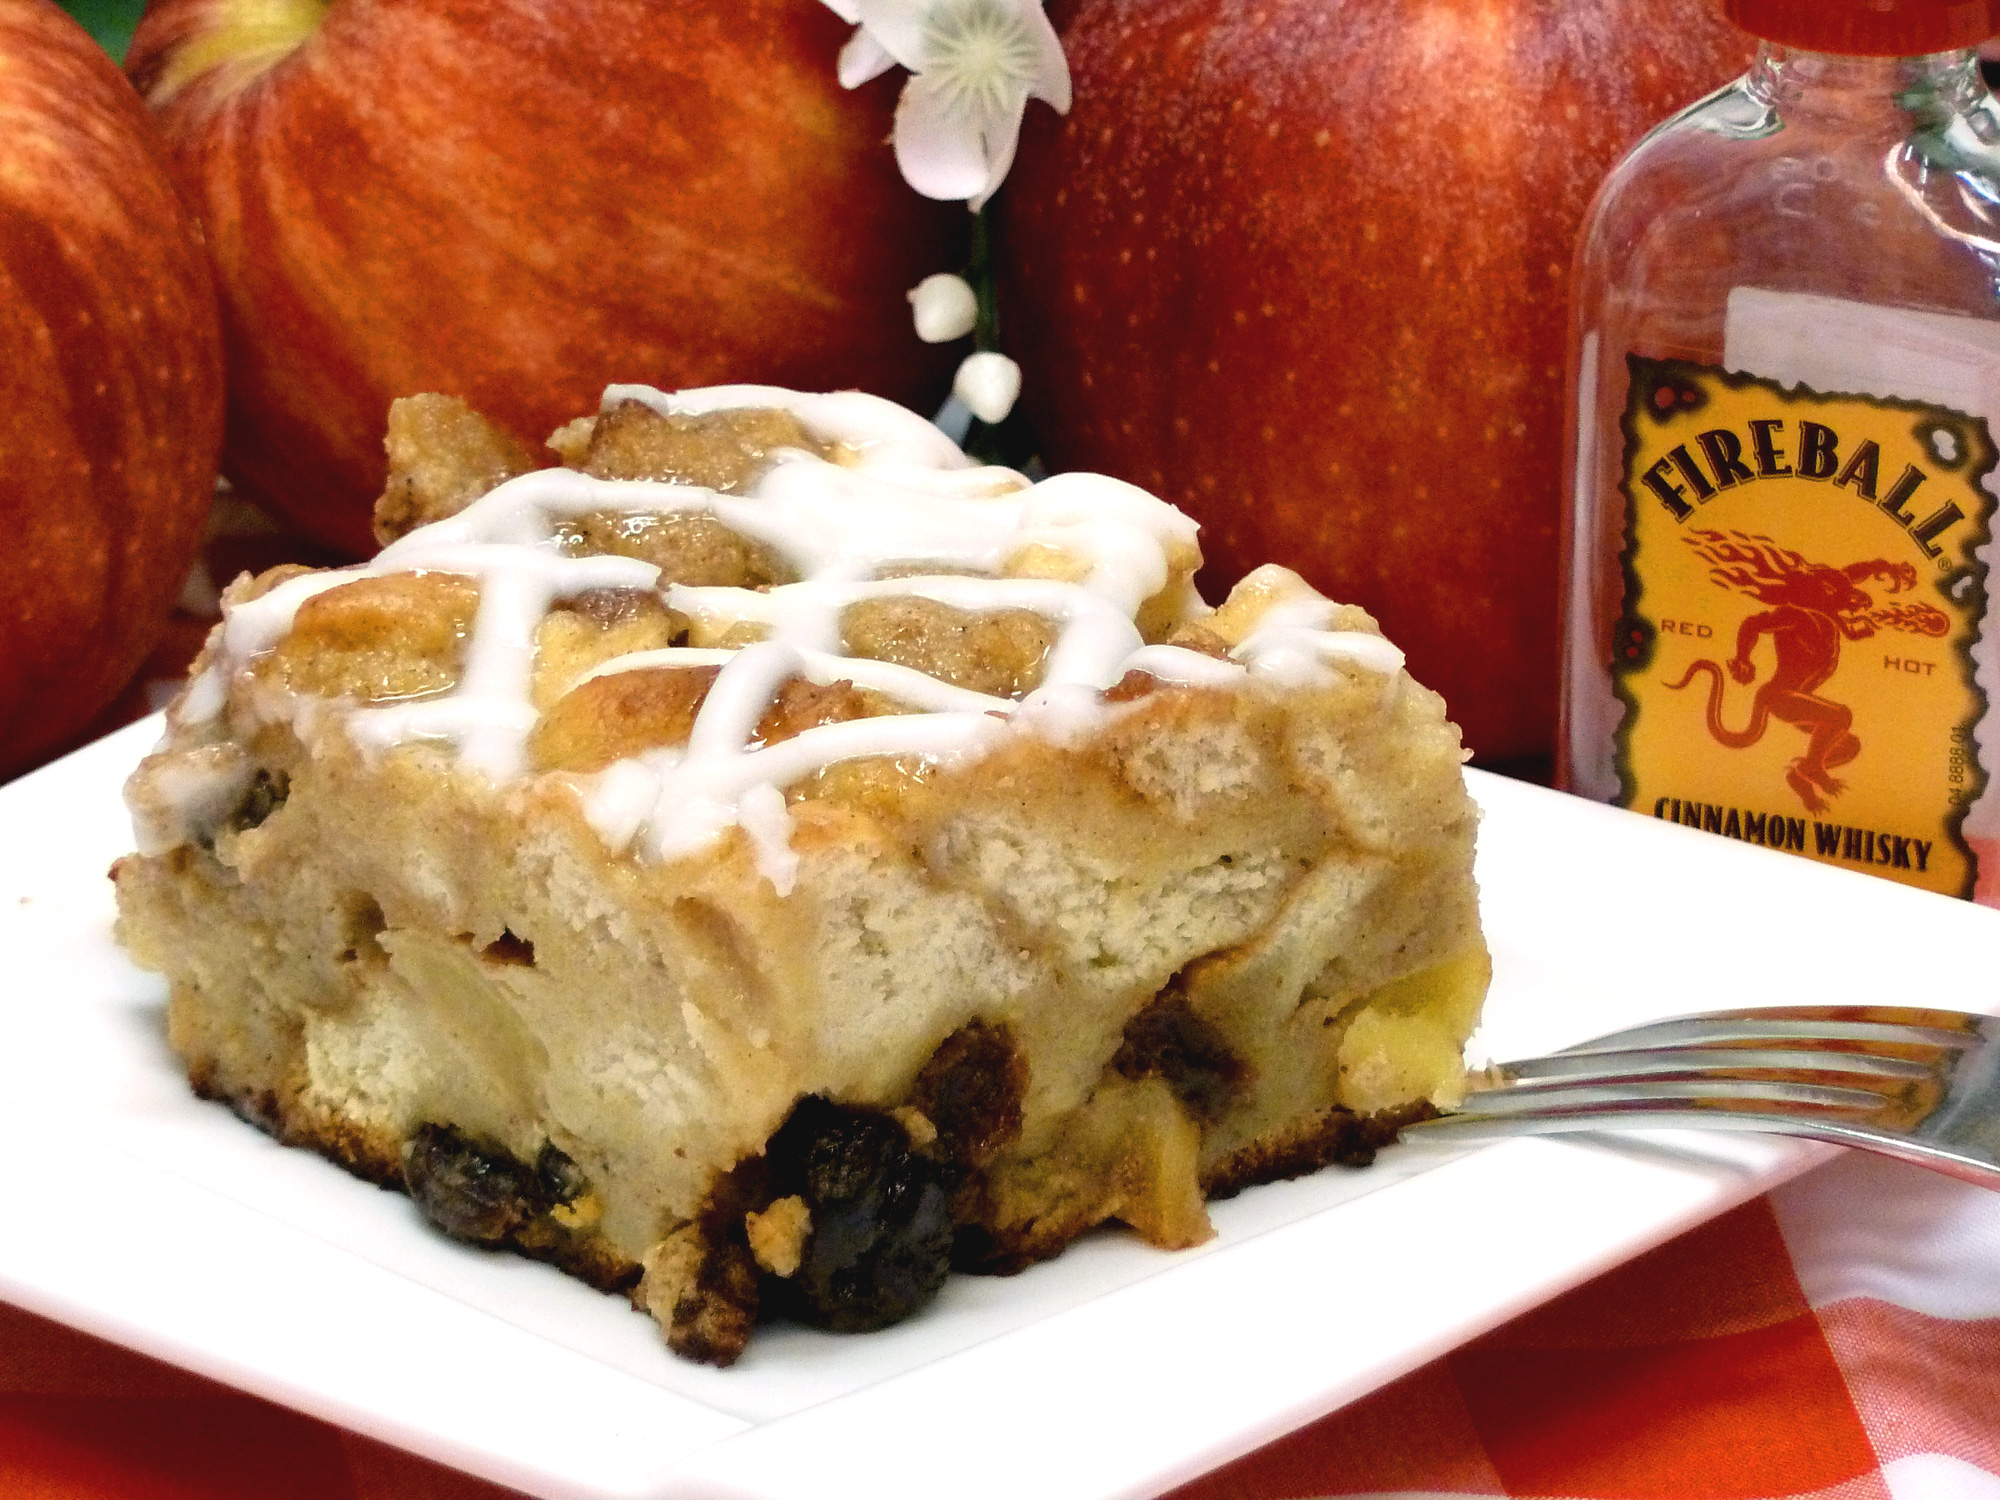 Fireball cinnamon whiskey goes great with apples and raisins to level up old-fashioned bread pudding.